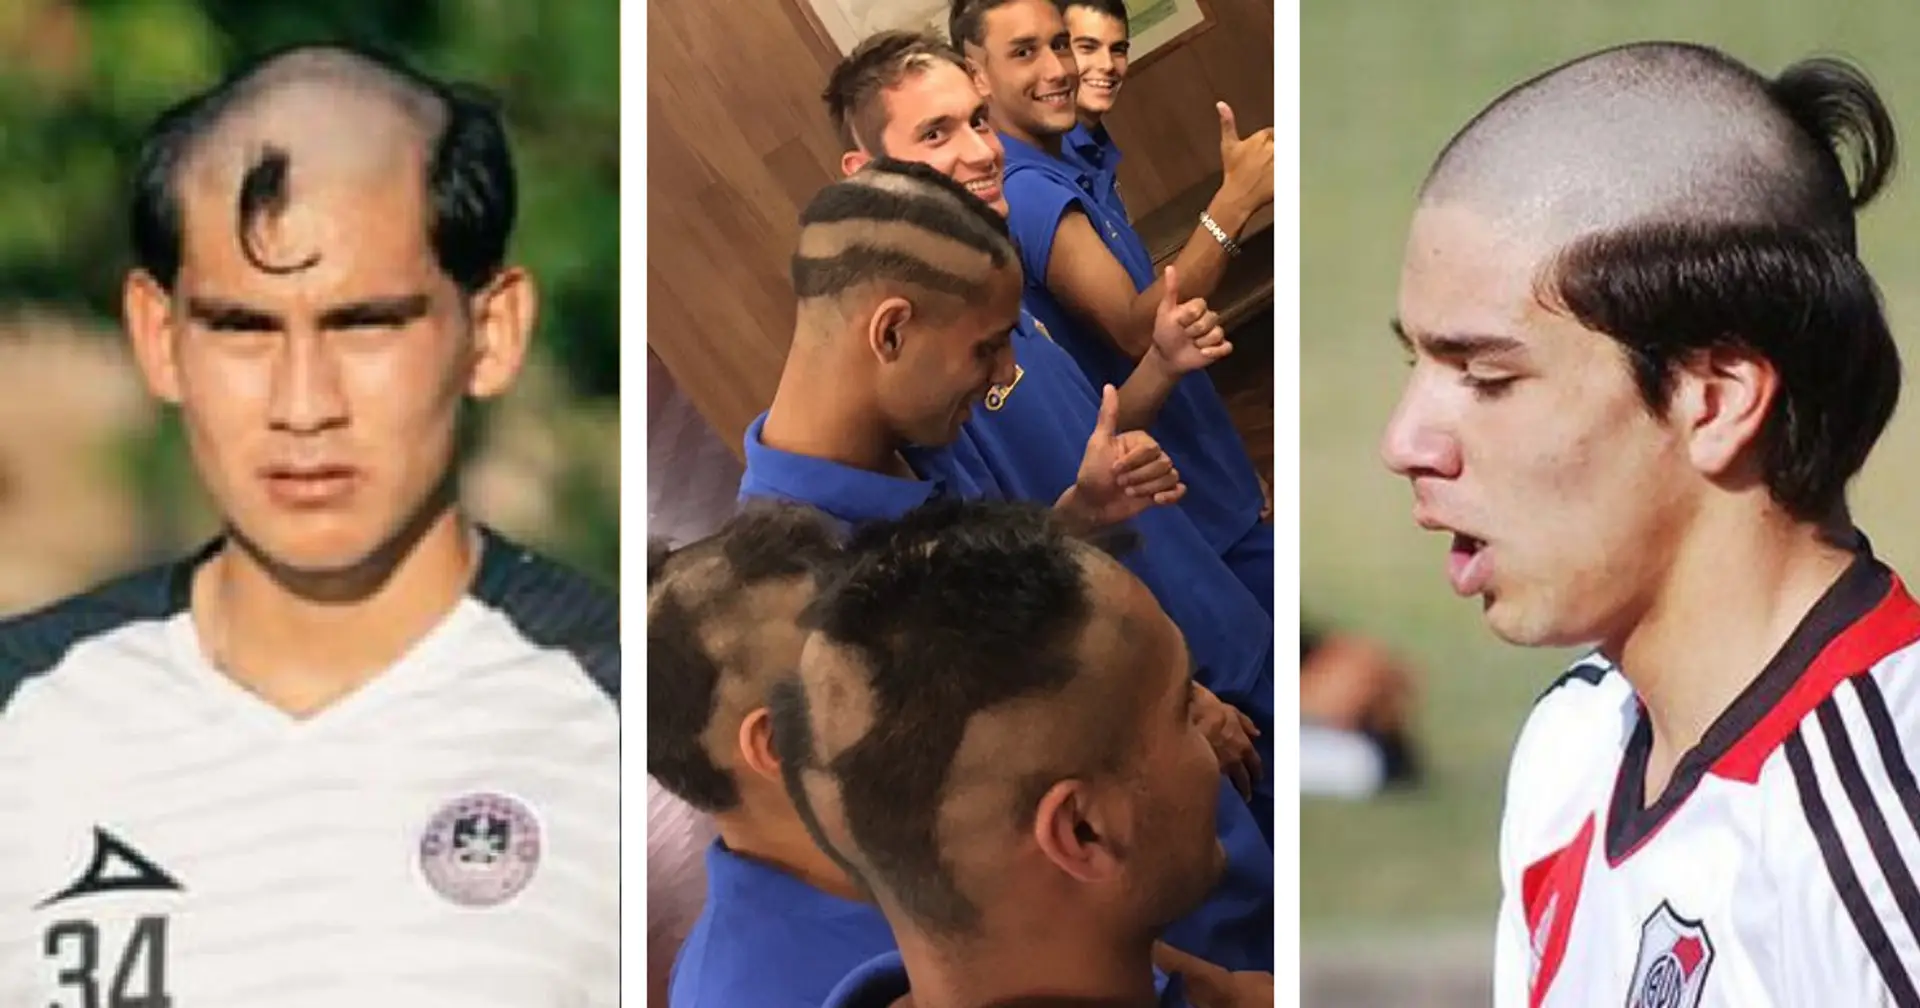 'It actually makes sense'. Why so many players in South America have ridiculous haircuts – explained